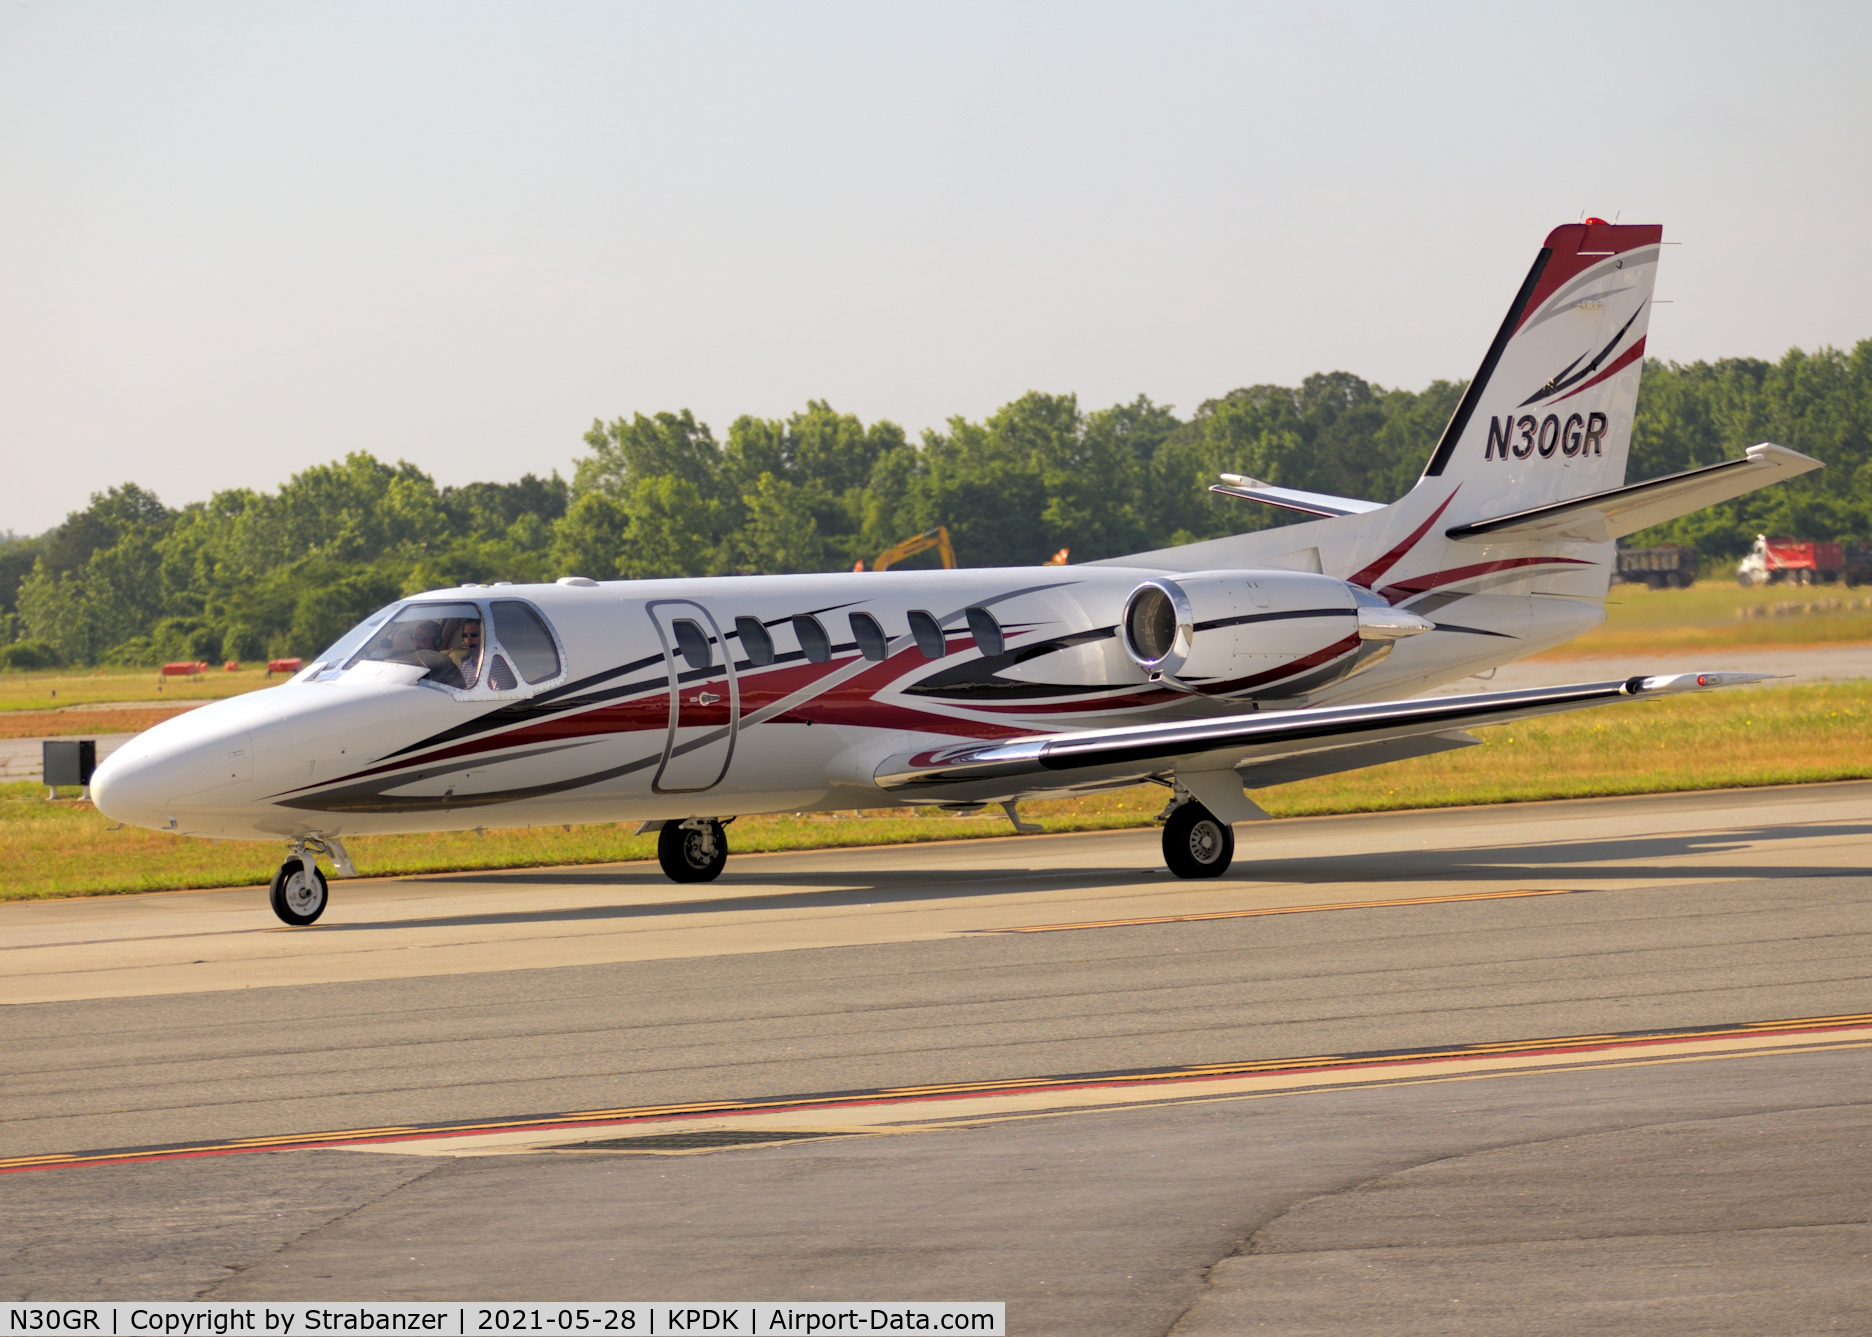 N30GR, Cessna 550 C/N 550-0656, Taxiing in from a flight from Columbia SC (KCUB)